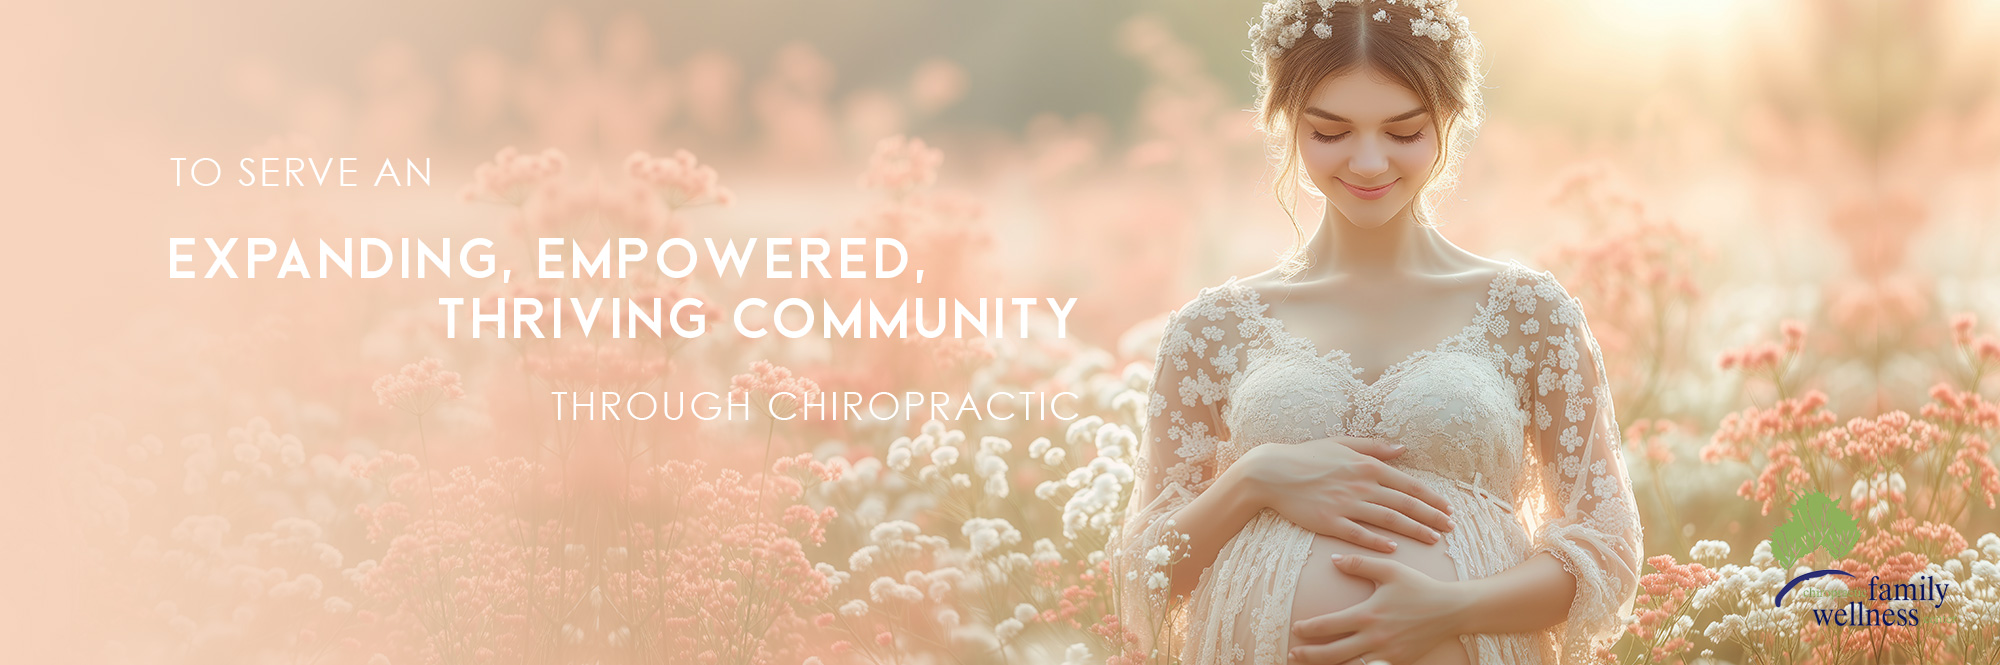 Pregnancy Neonatal Care - Chiropractic Family Wellness Center, Scarborough ME